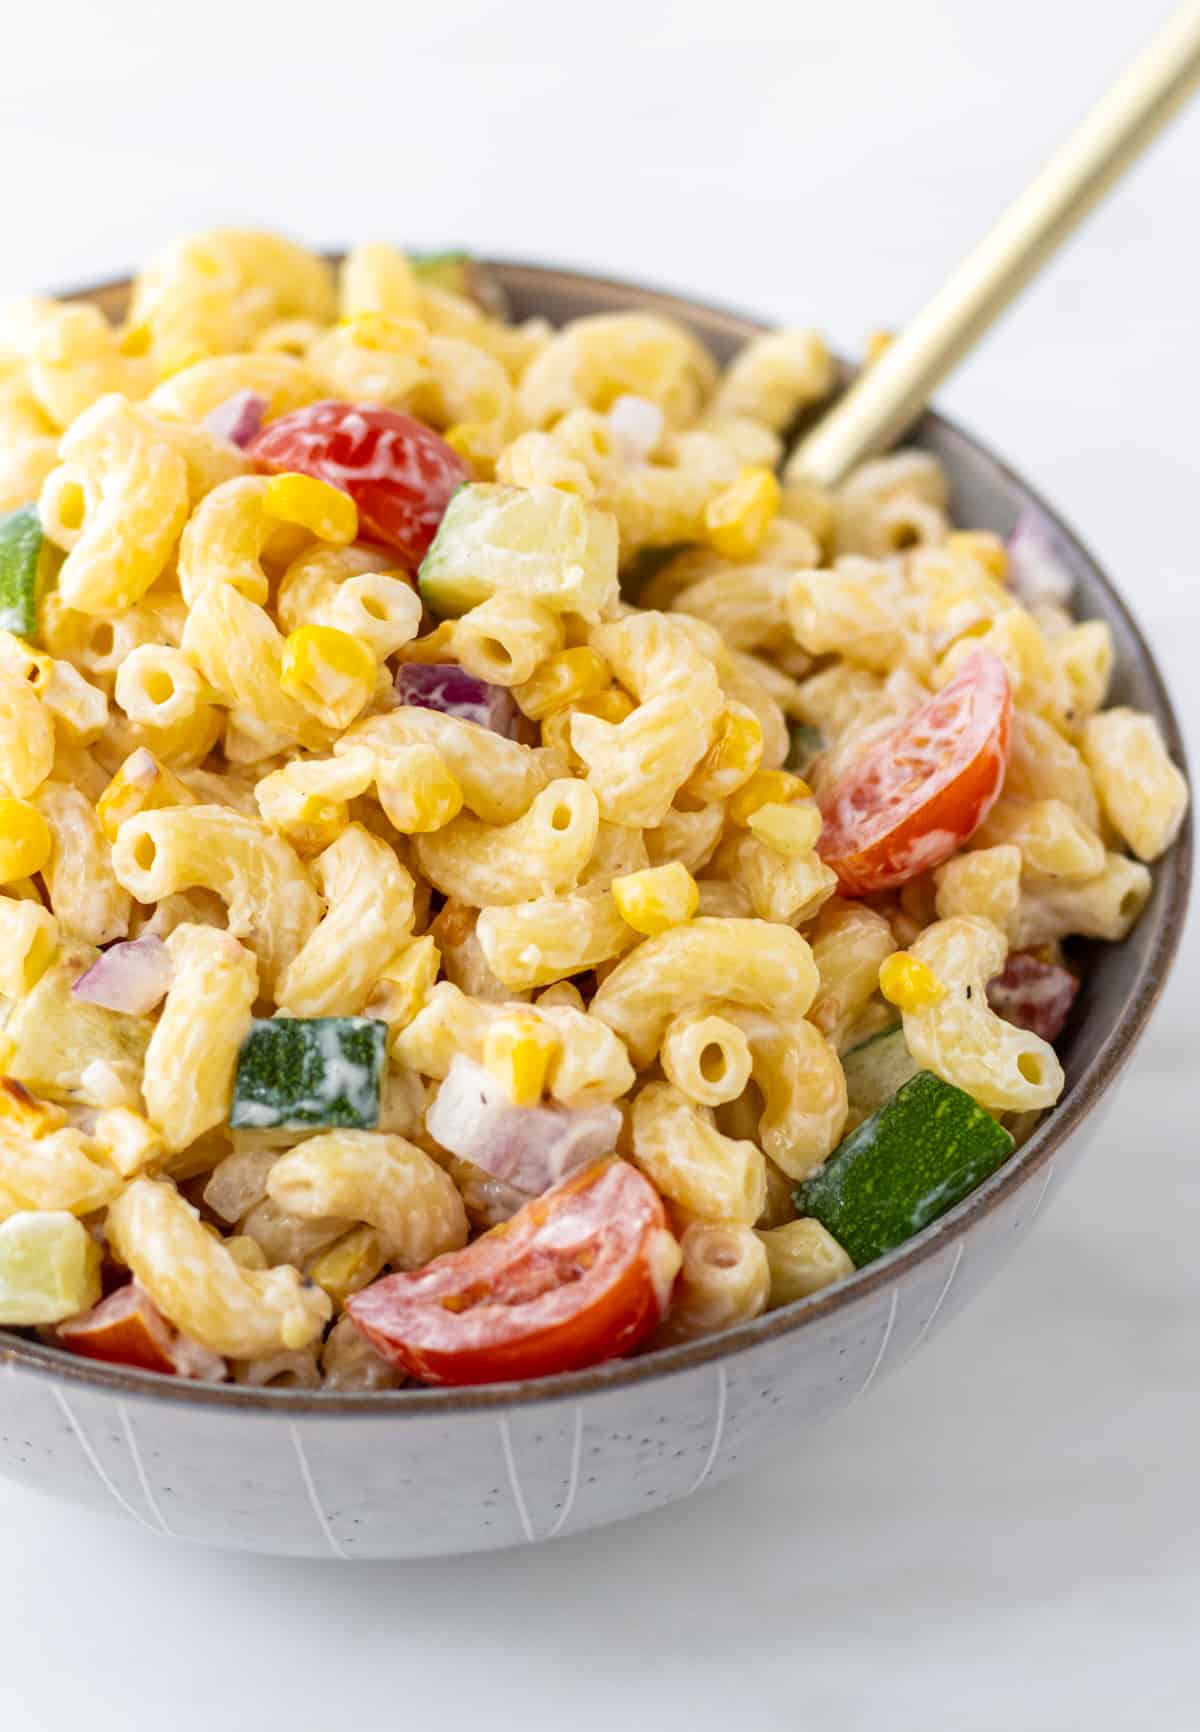 Creamy pasta salad with corn, zucchini, tomatoes, and red onion in a bowl with a spoon.